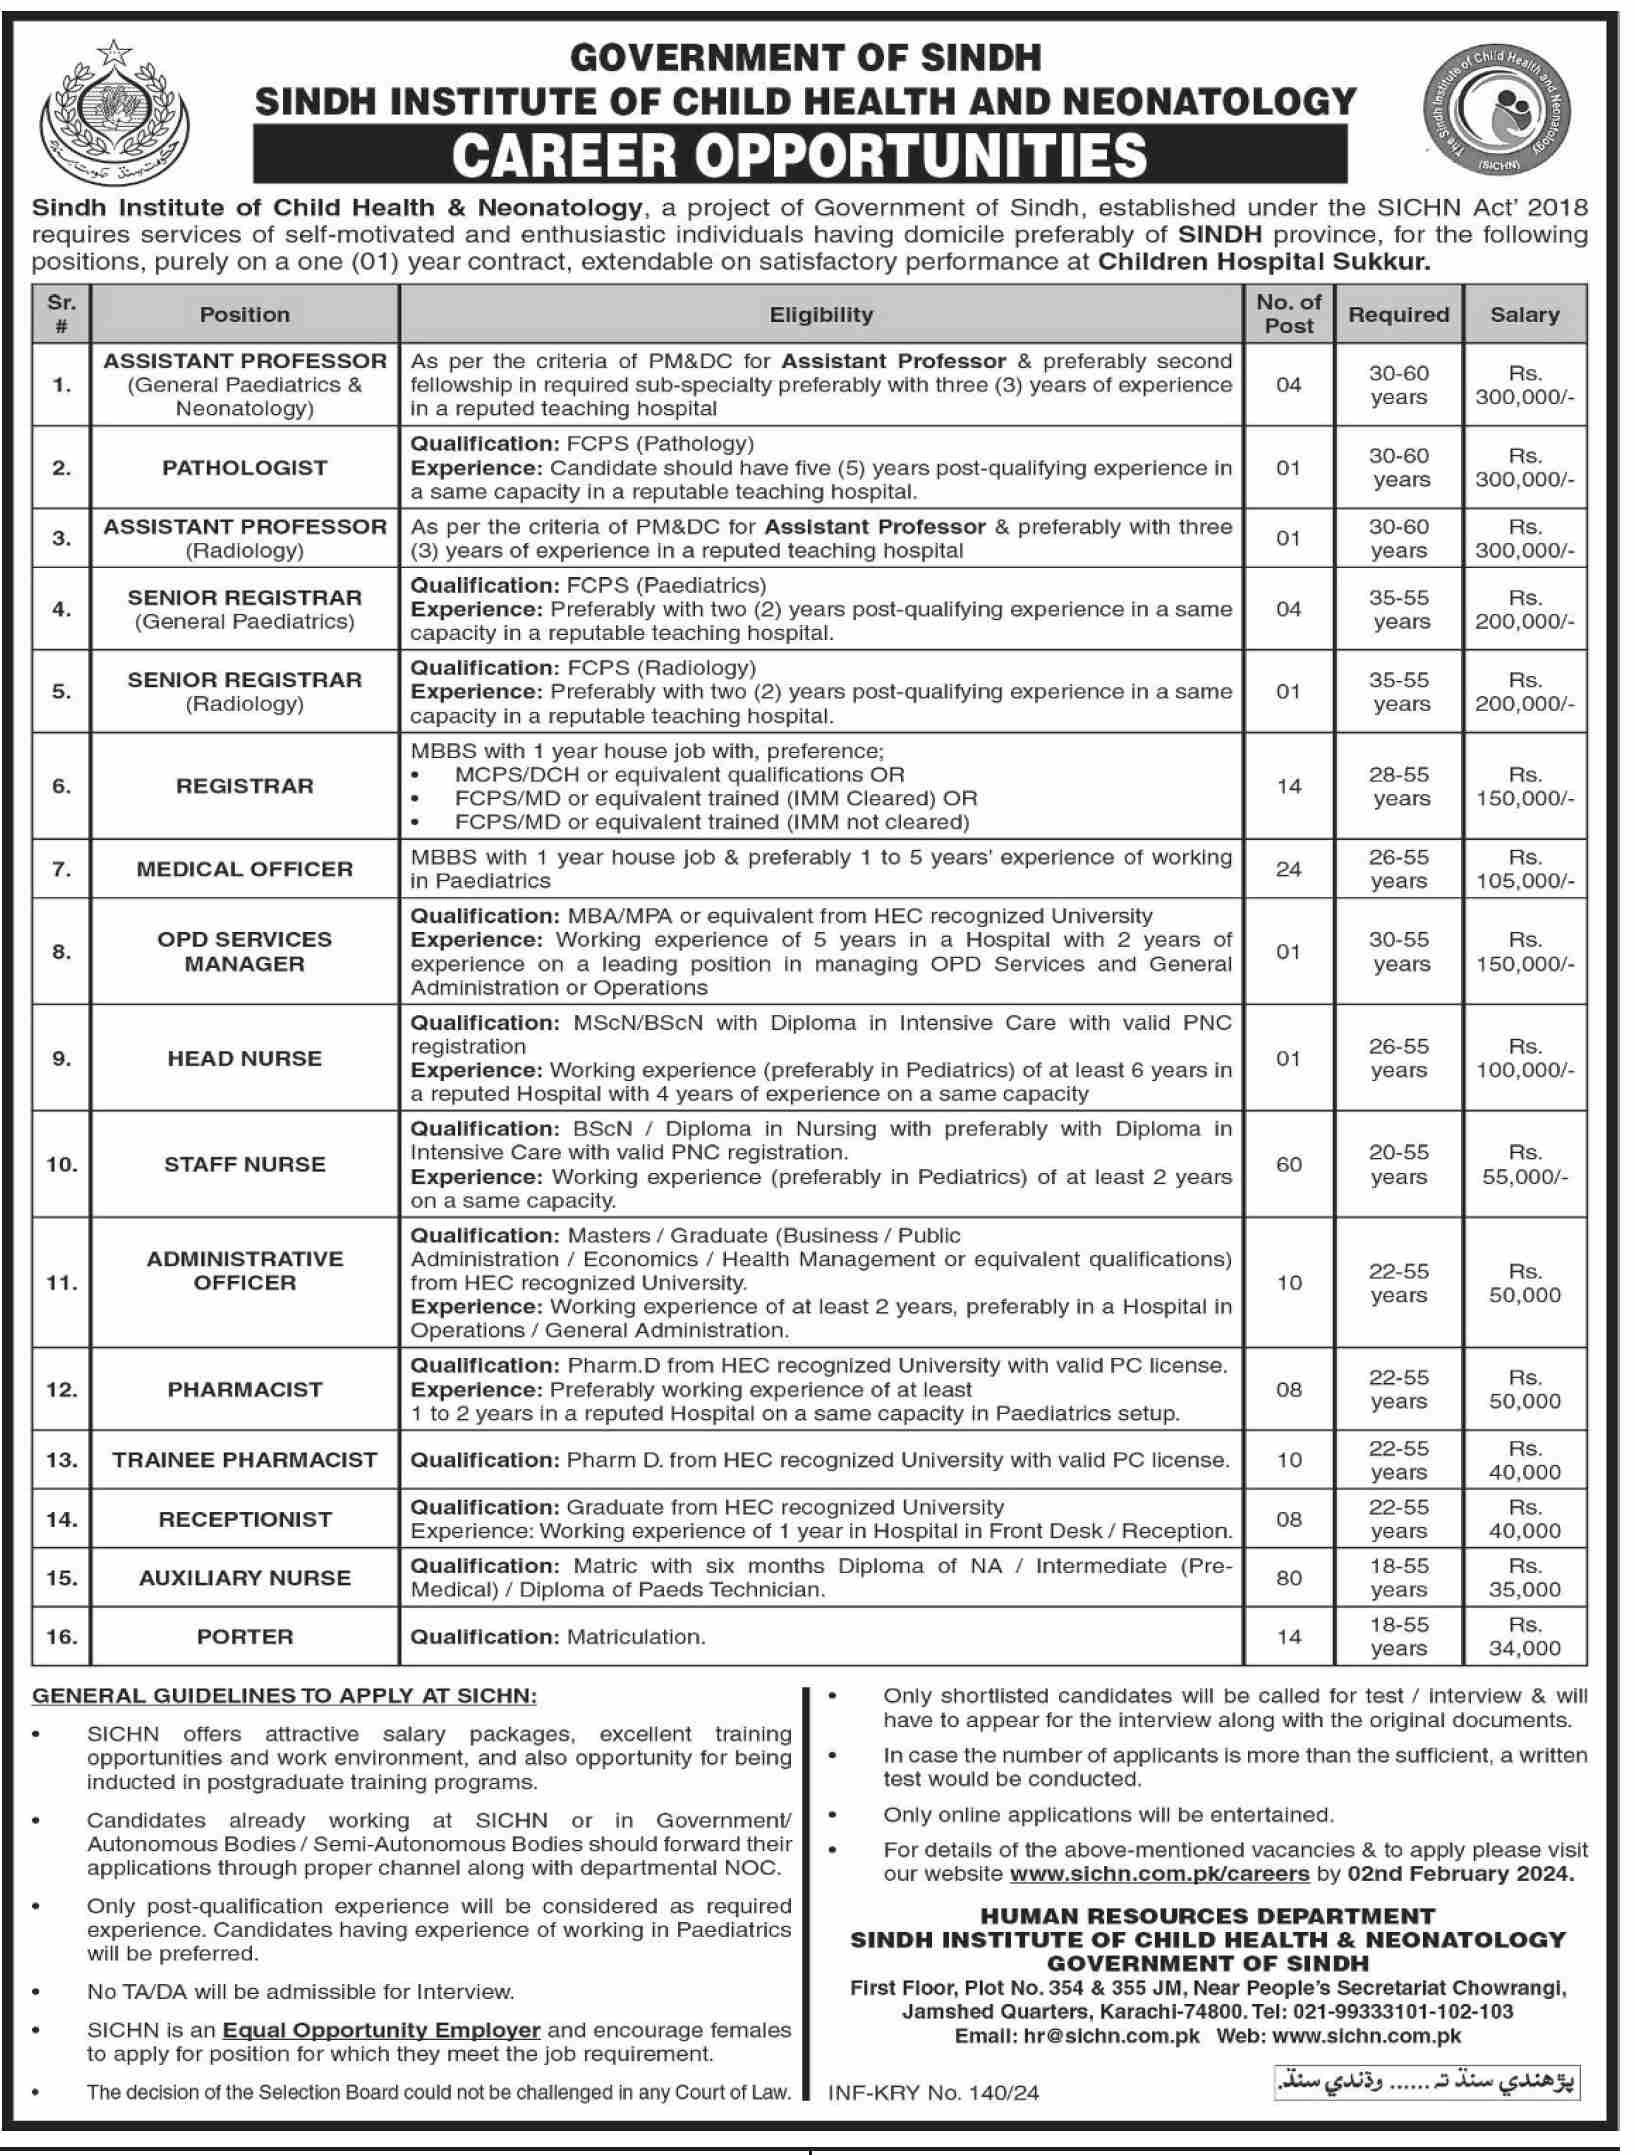 Government of Sindh Jobs in Sindh Institute of Child Health And Neonatology